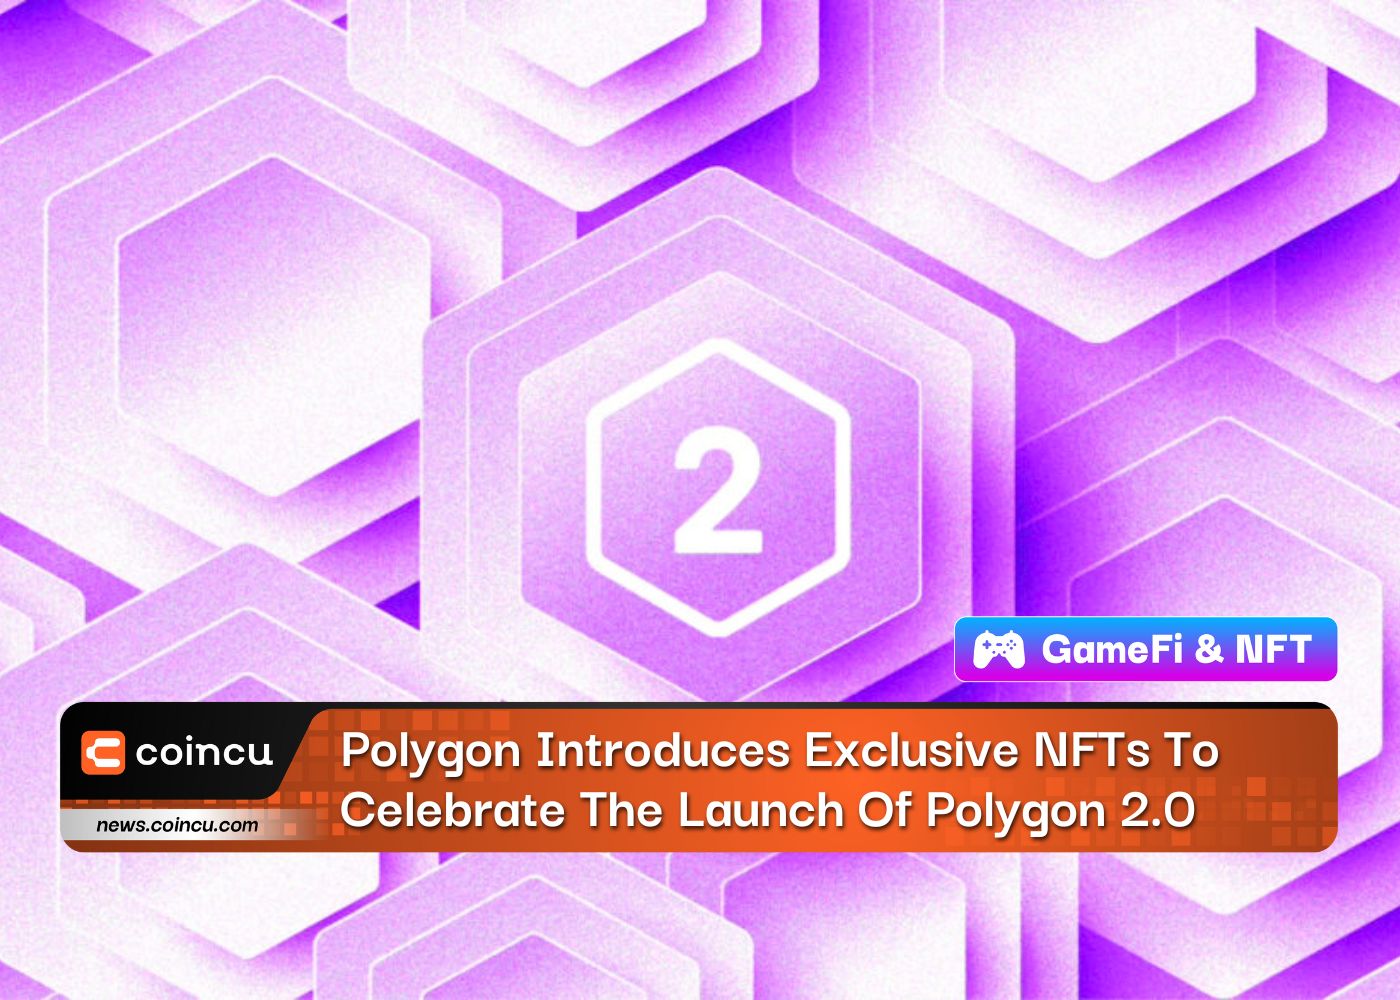 Polygon Introduces Exclusive NFTs To Celebrate The Launch Of Polygon 2.0